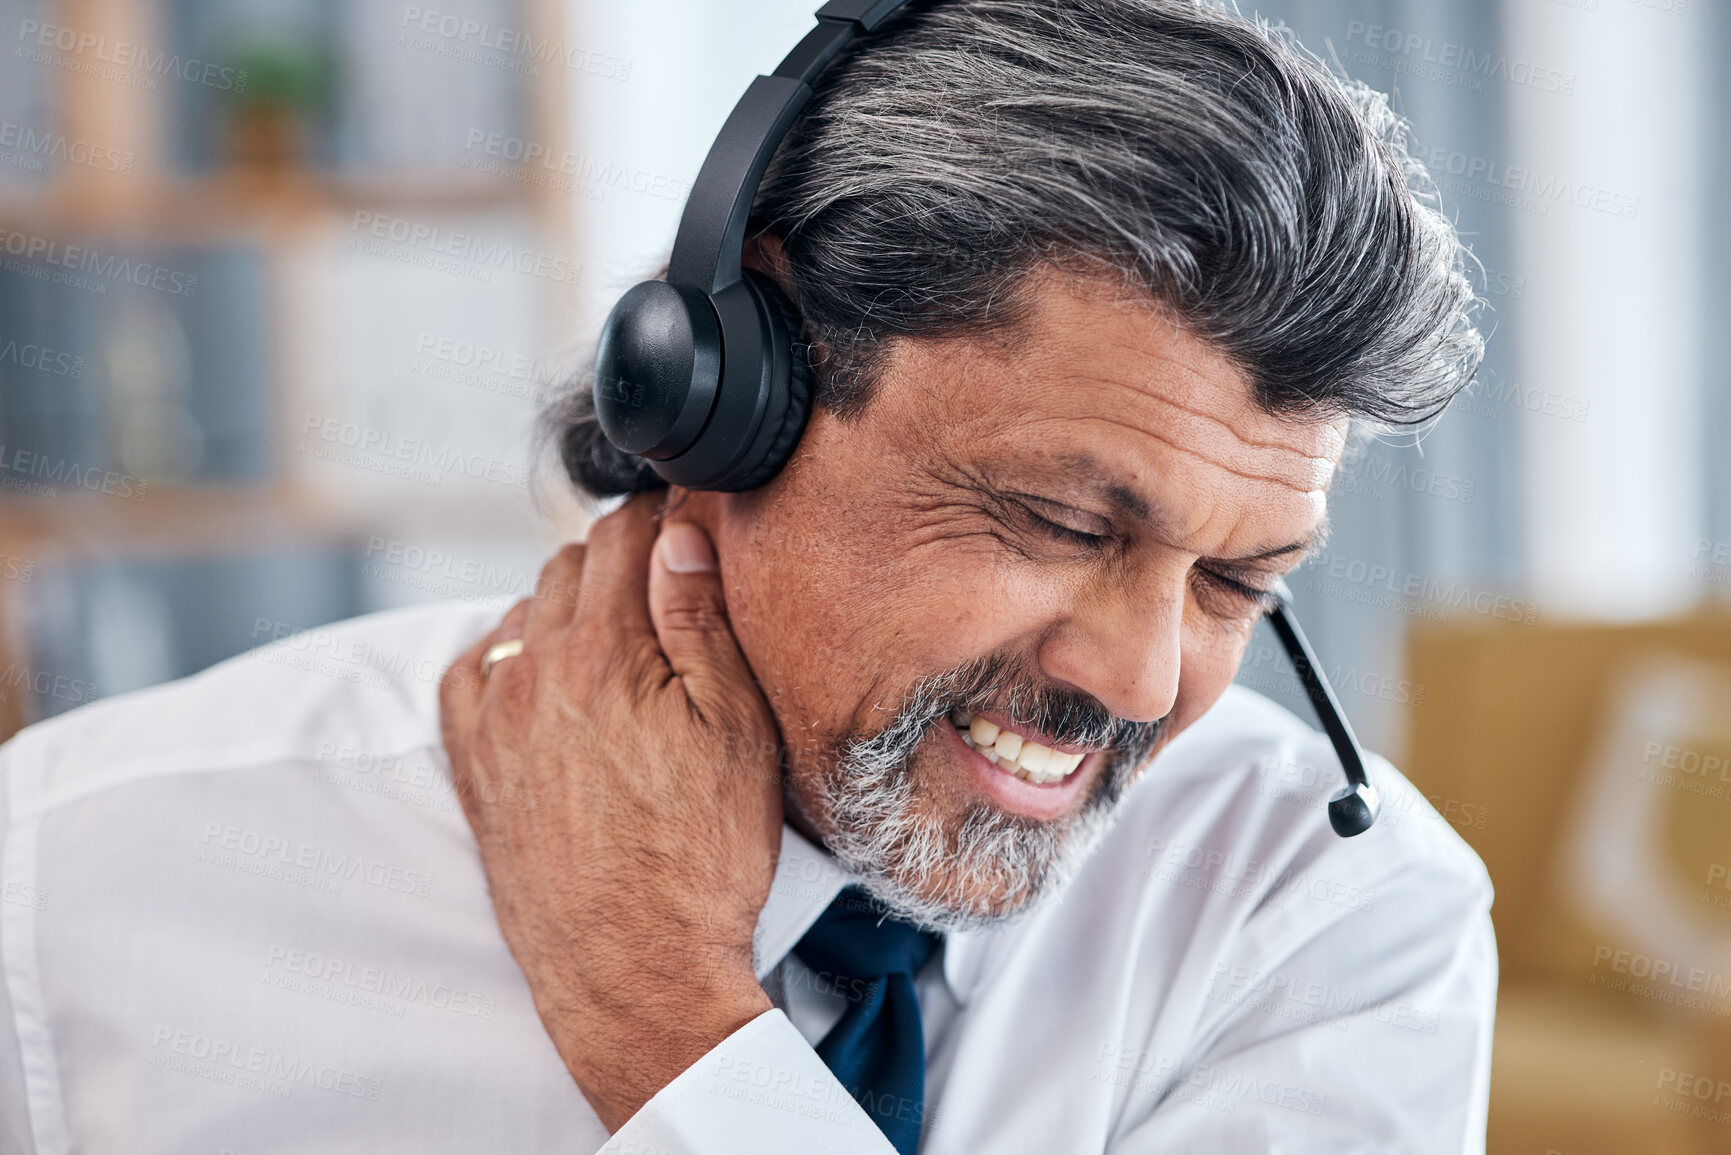 Buy stock photo Neck pain problem, call center and business man with anatomy injury crisis, sore muscle or fibromyalgia strain, risk or hurt. Face, customer service or office person, consultant or agent with tension